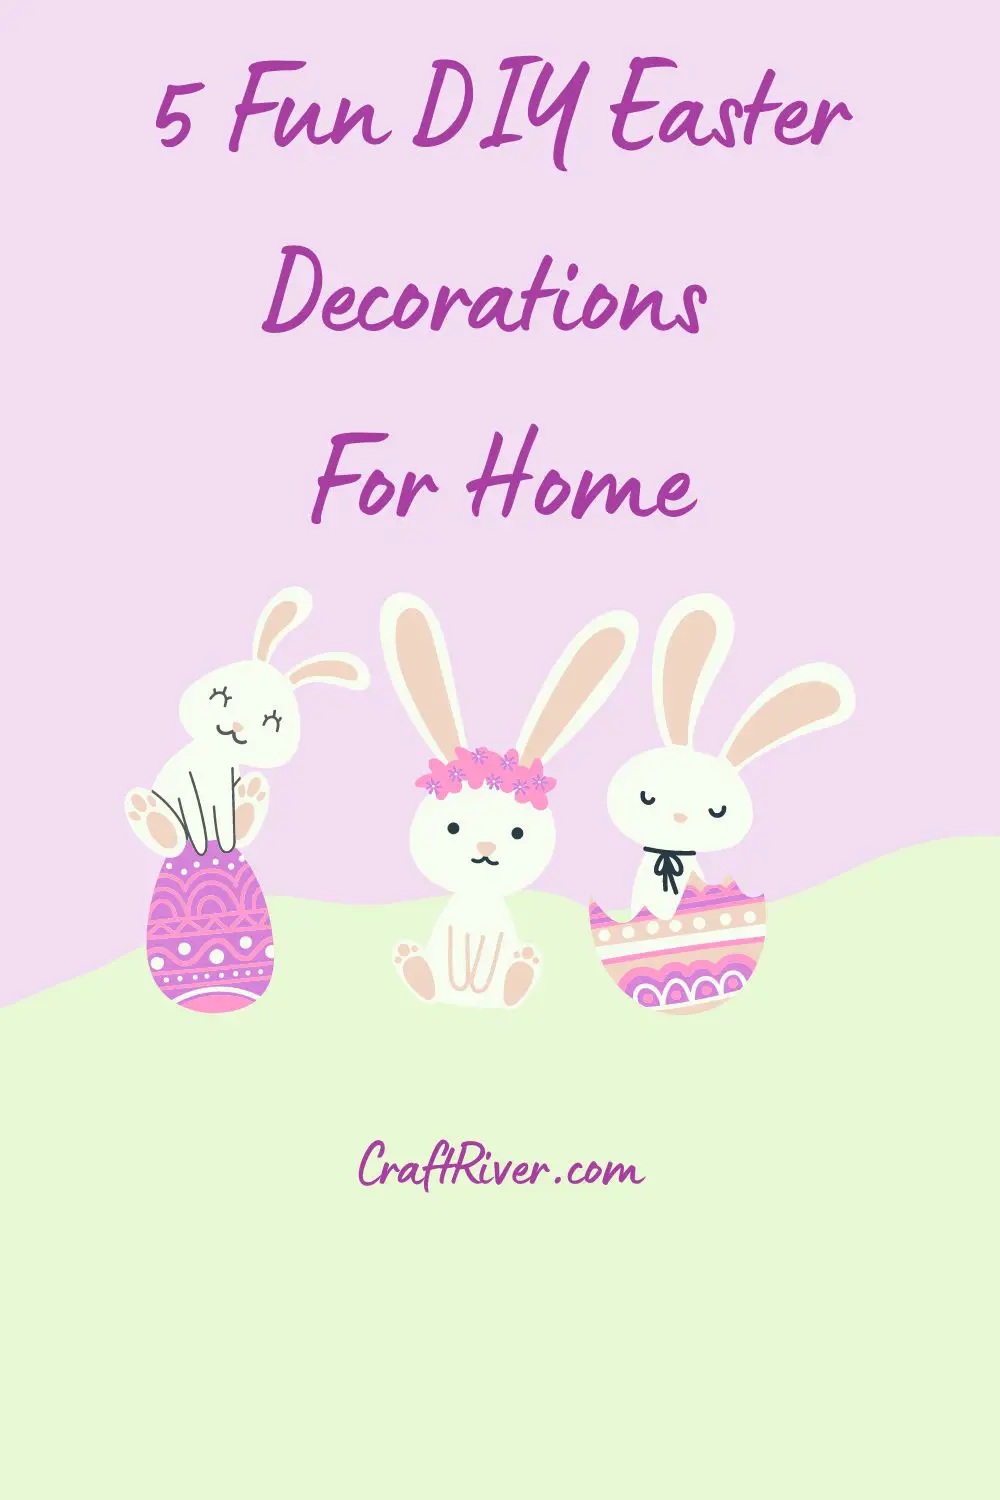 5 Fun and Creative DIY Easter Decorations For Your Home That Are Simply Charming